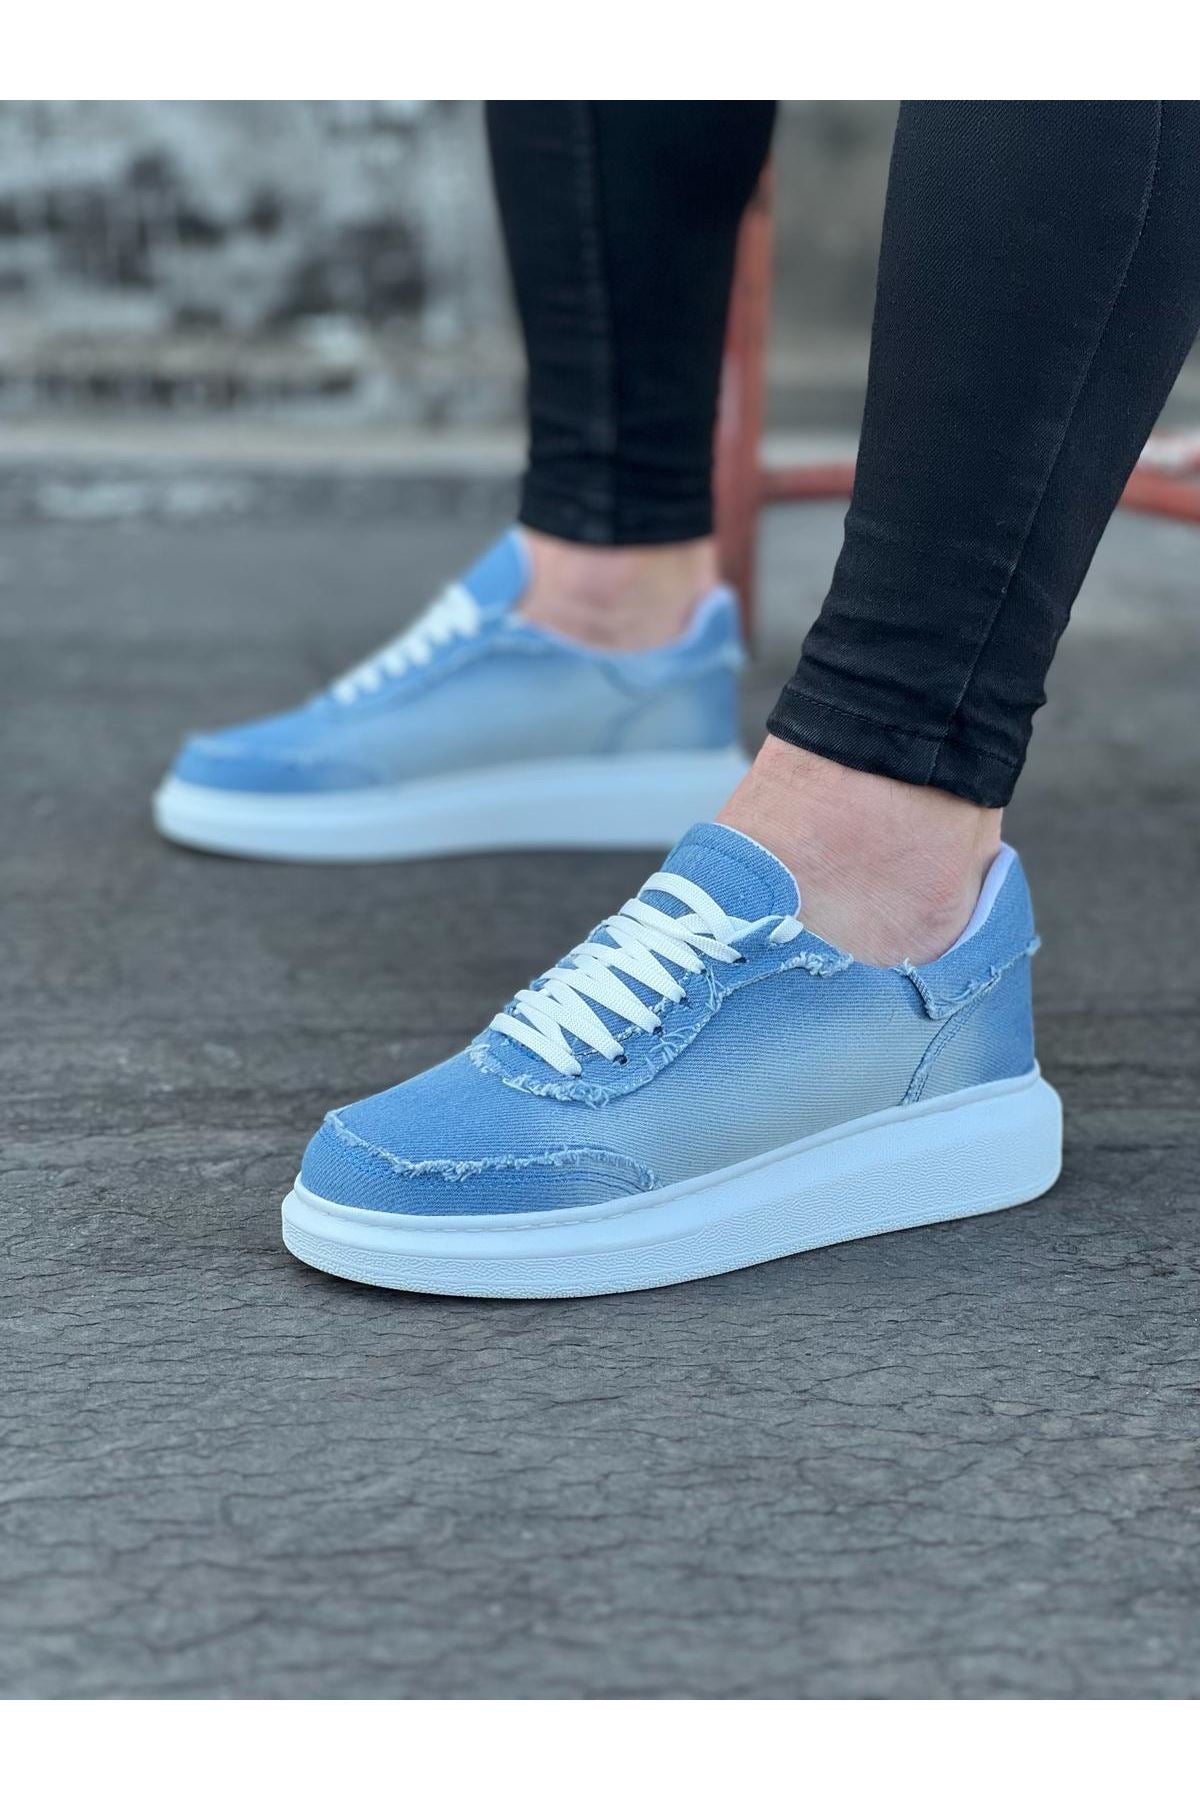 WG018 Ice Blue Men's Casual Shoes - STREETMODE ™